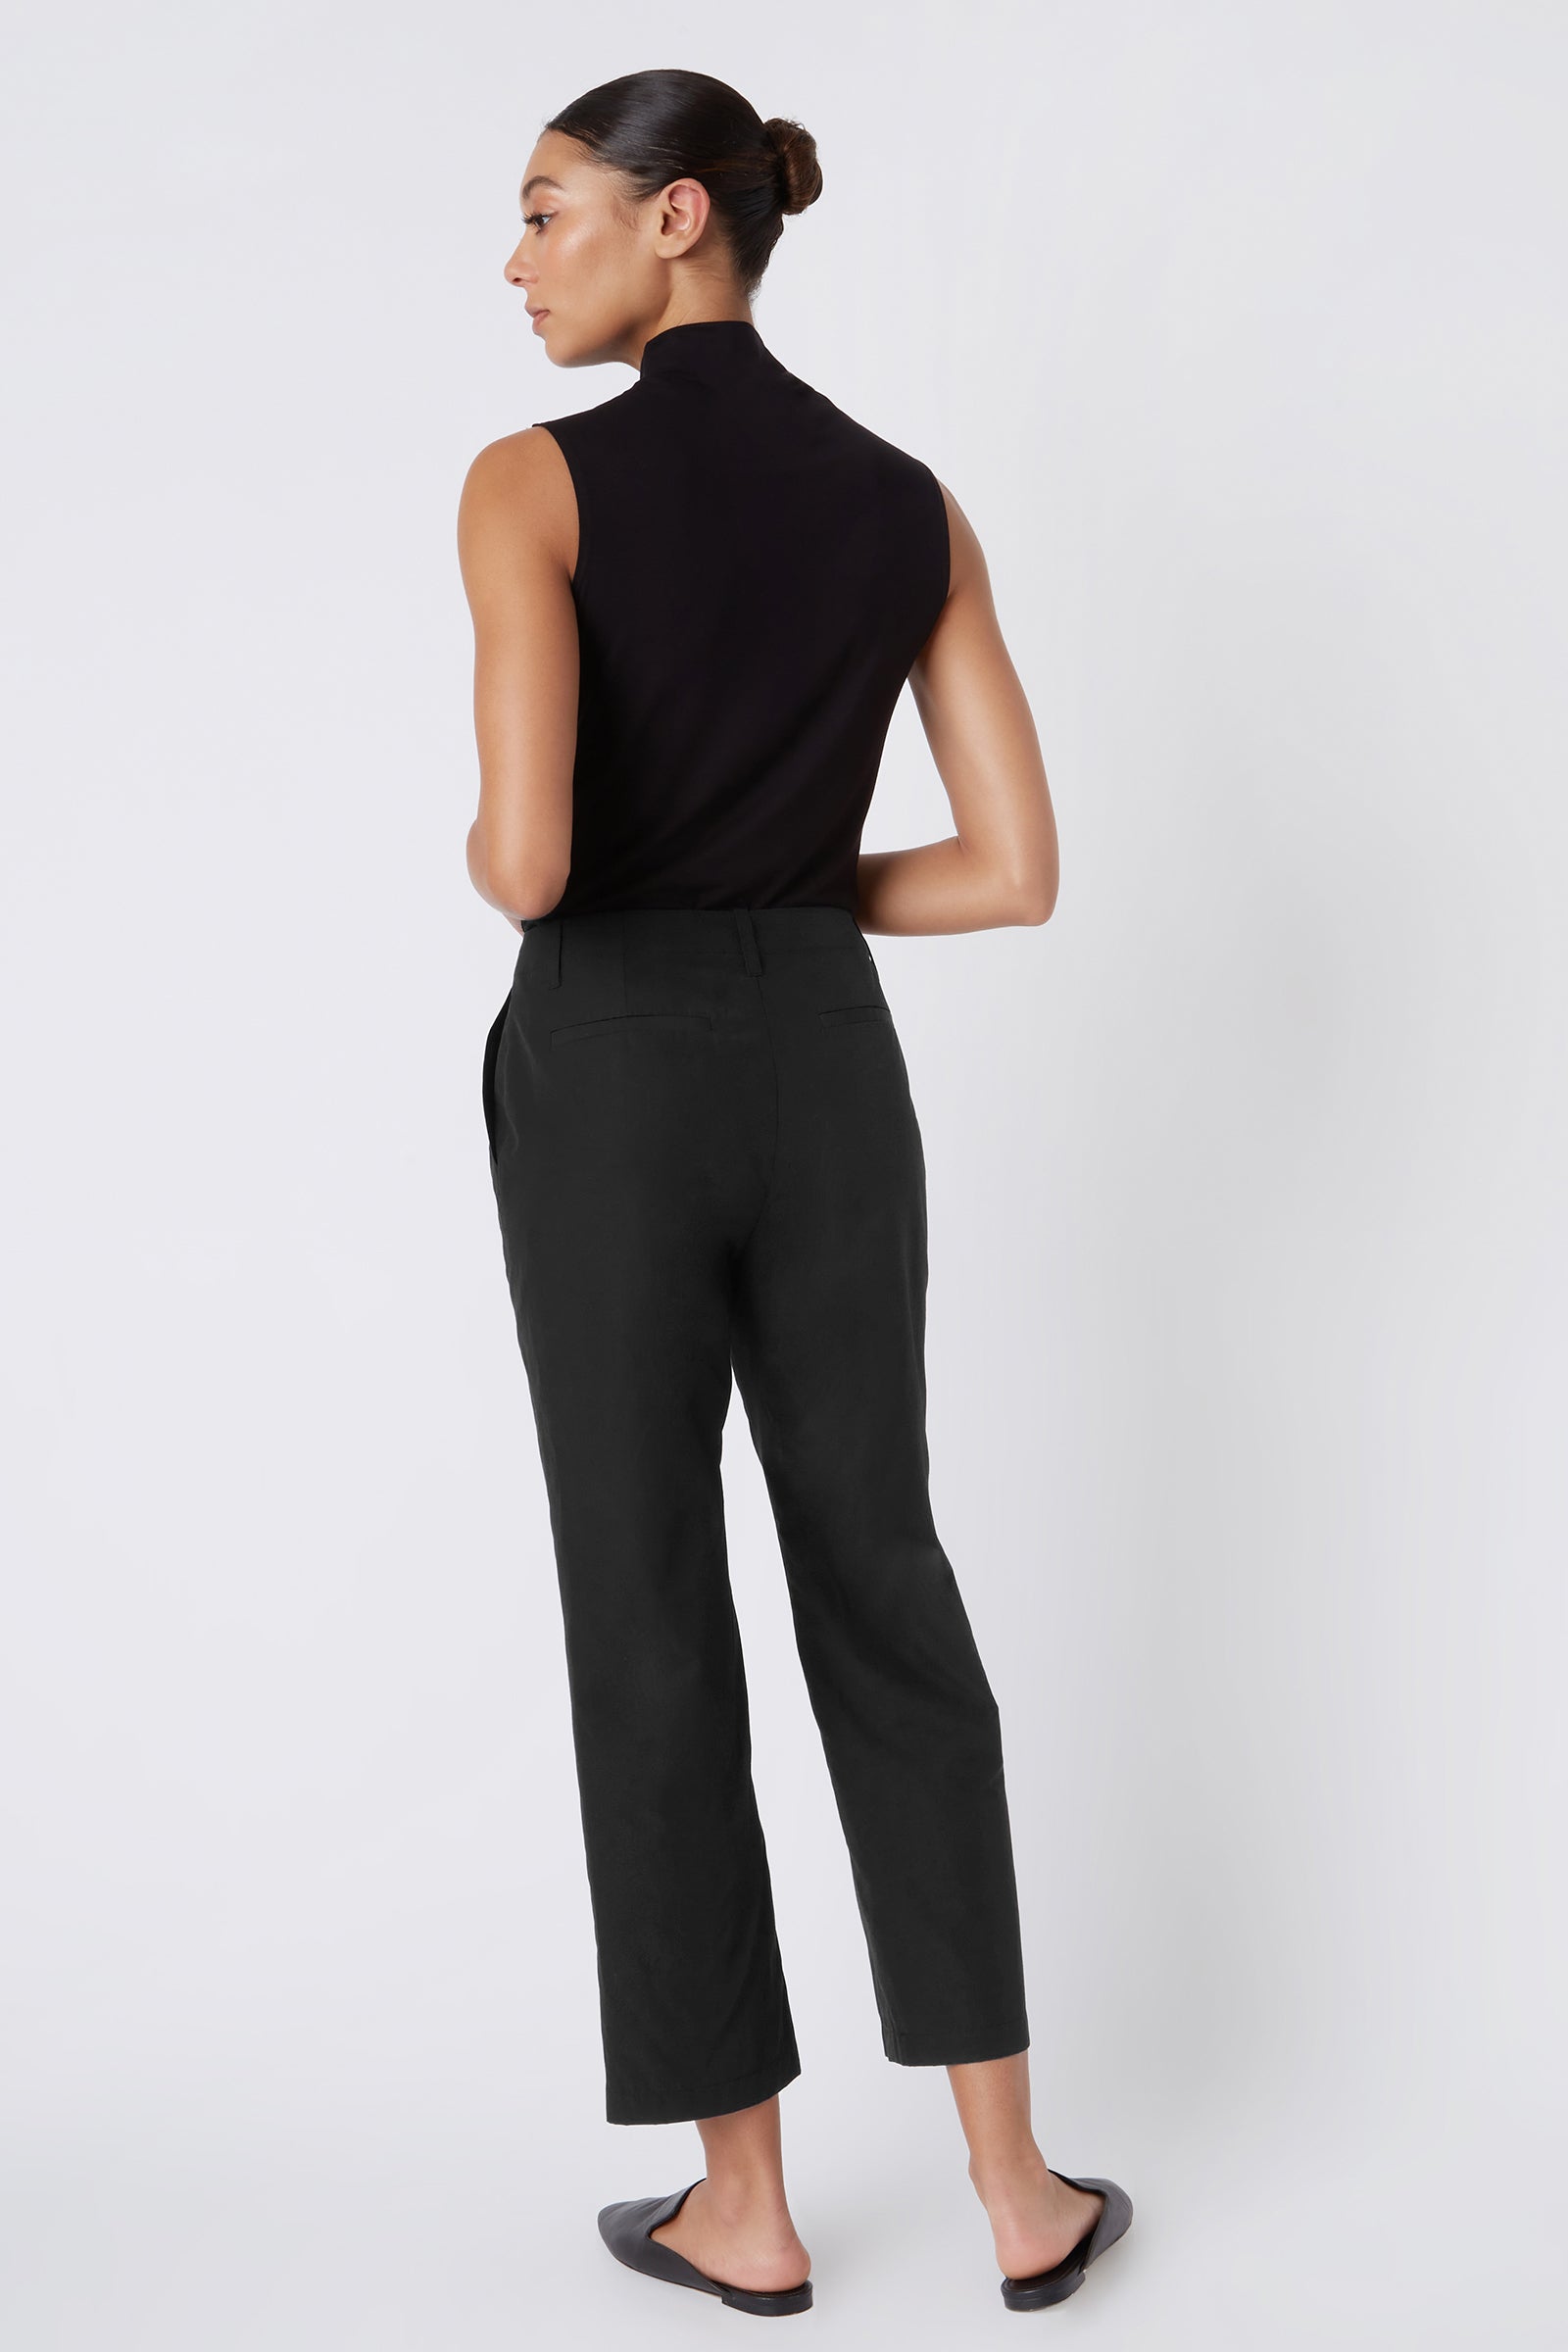 Kal Rieman Francoise Cigarette Pant in Black on Model with Arms Crossed Full Front View